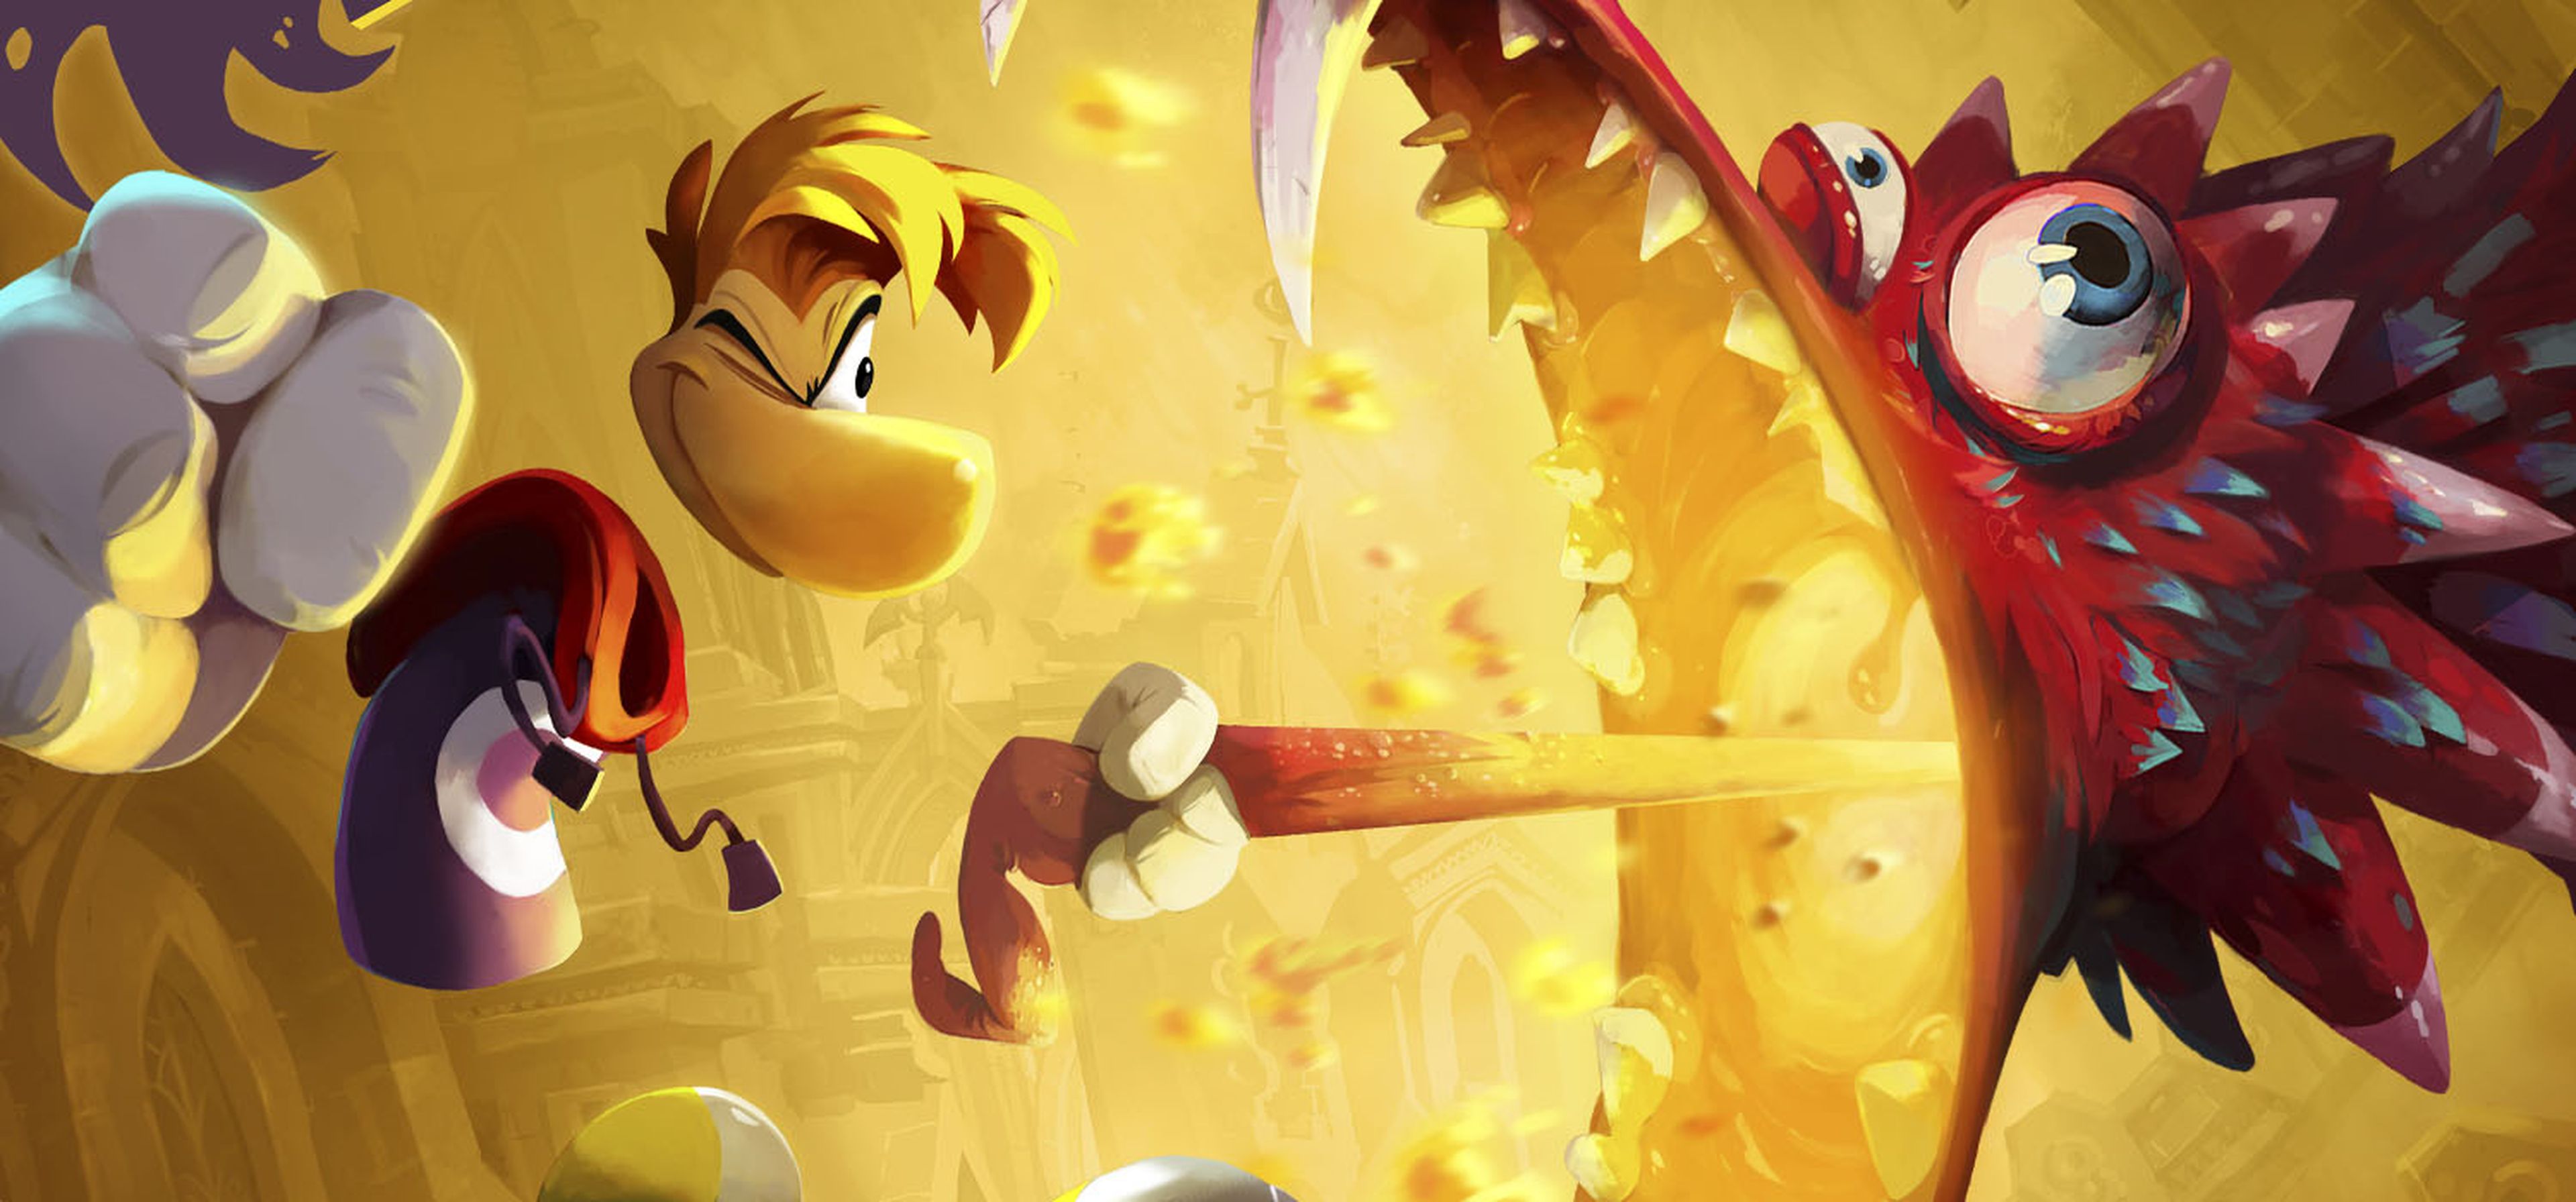 Rayman Legends: Definitive Edition Review (Switch)